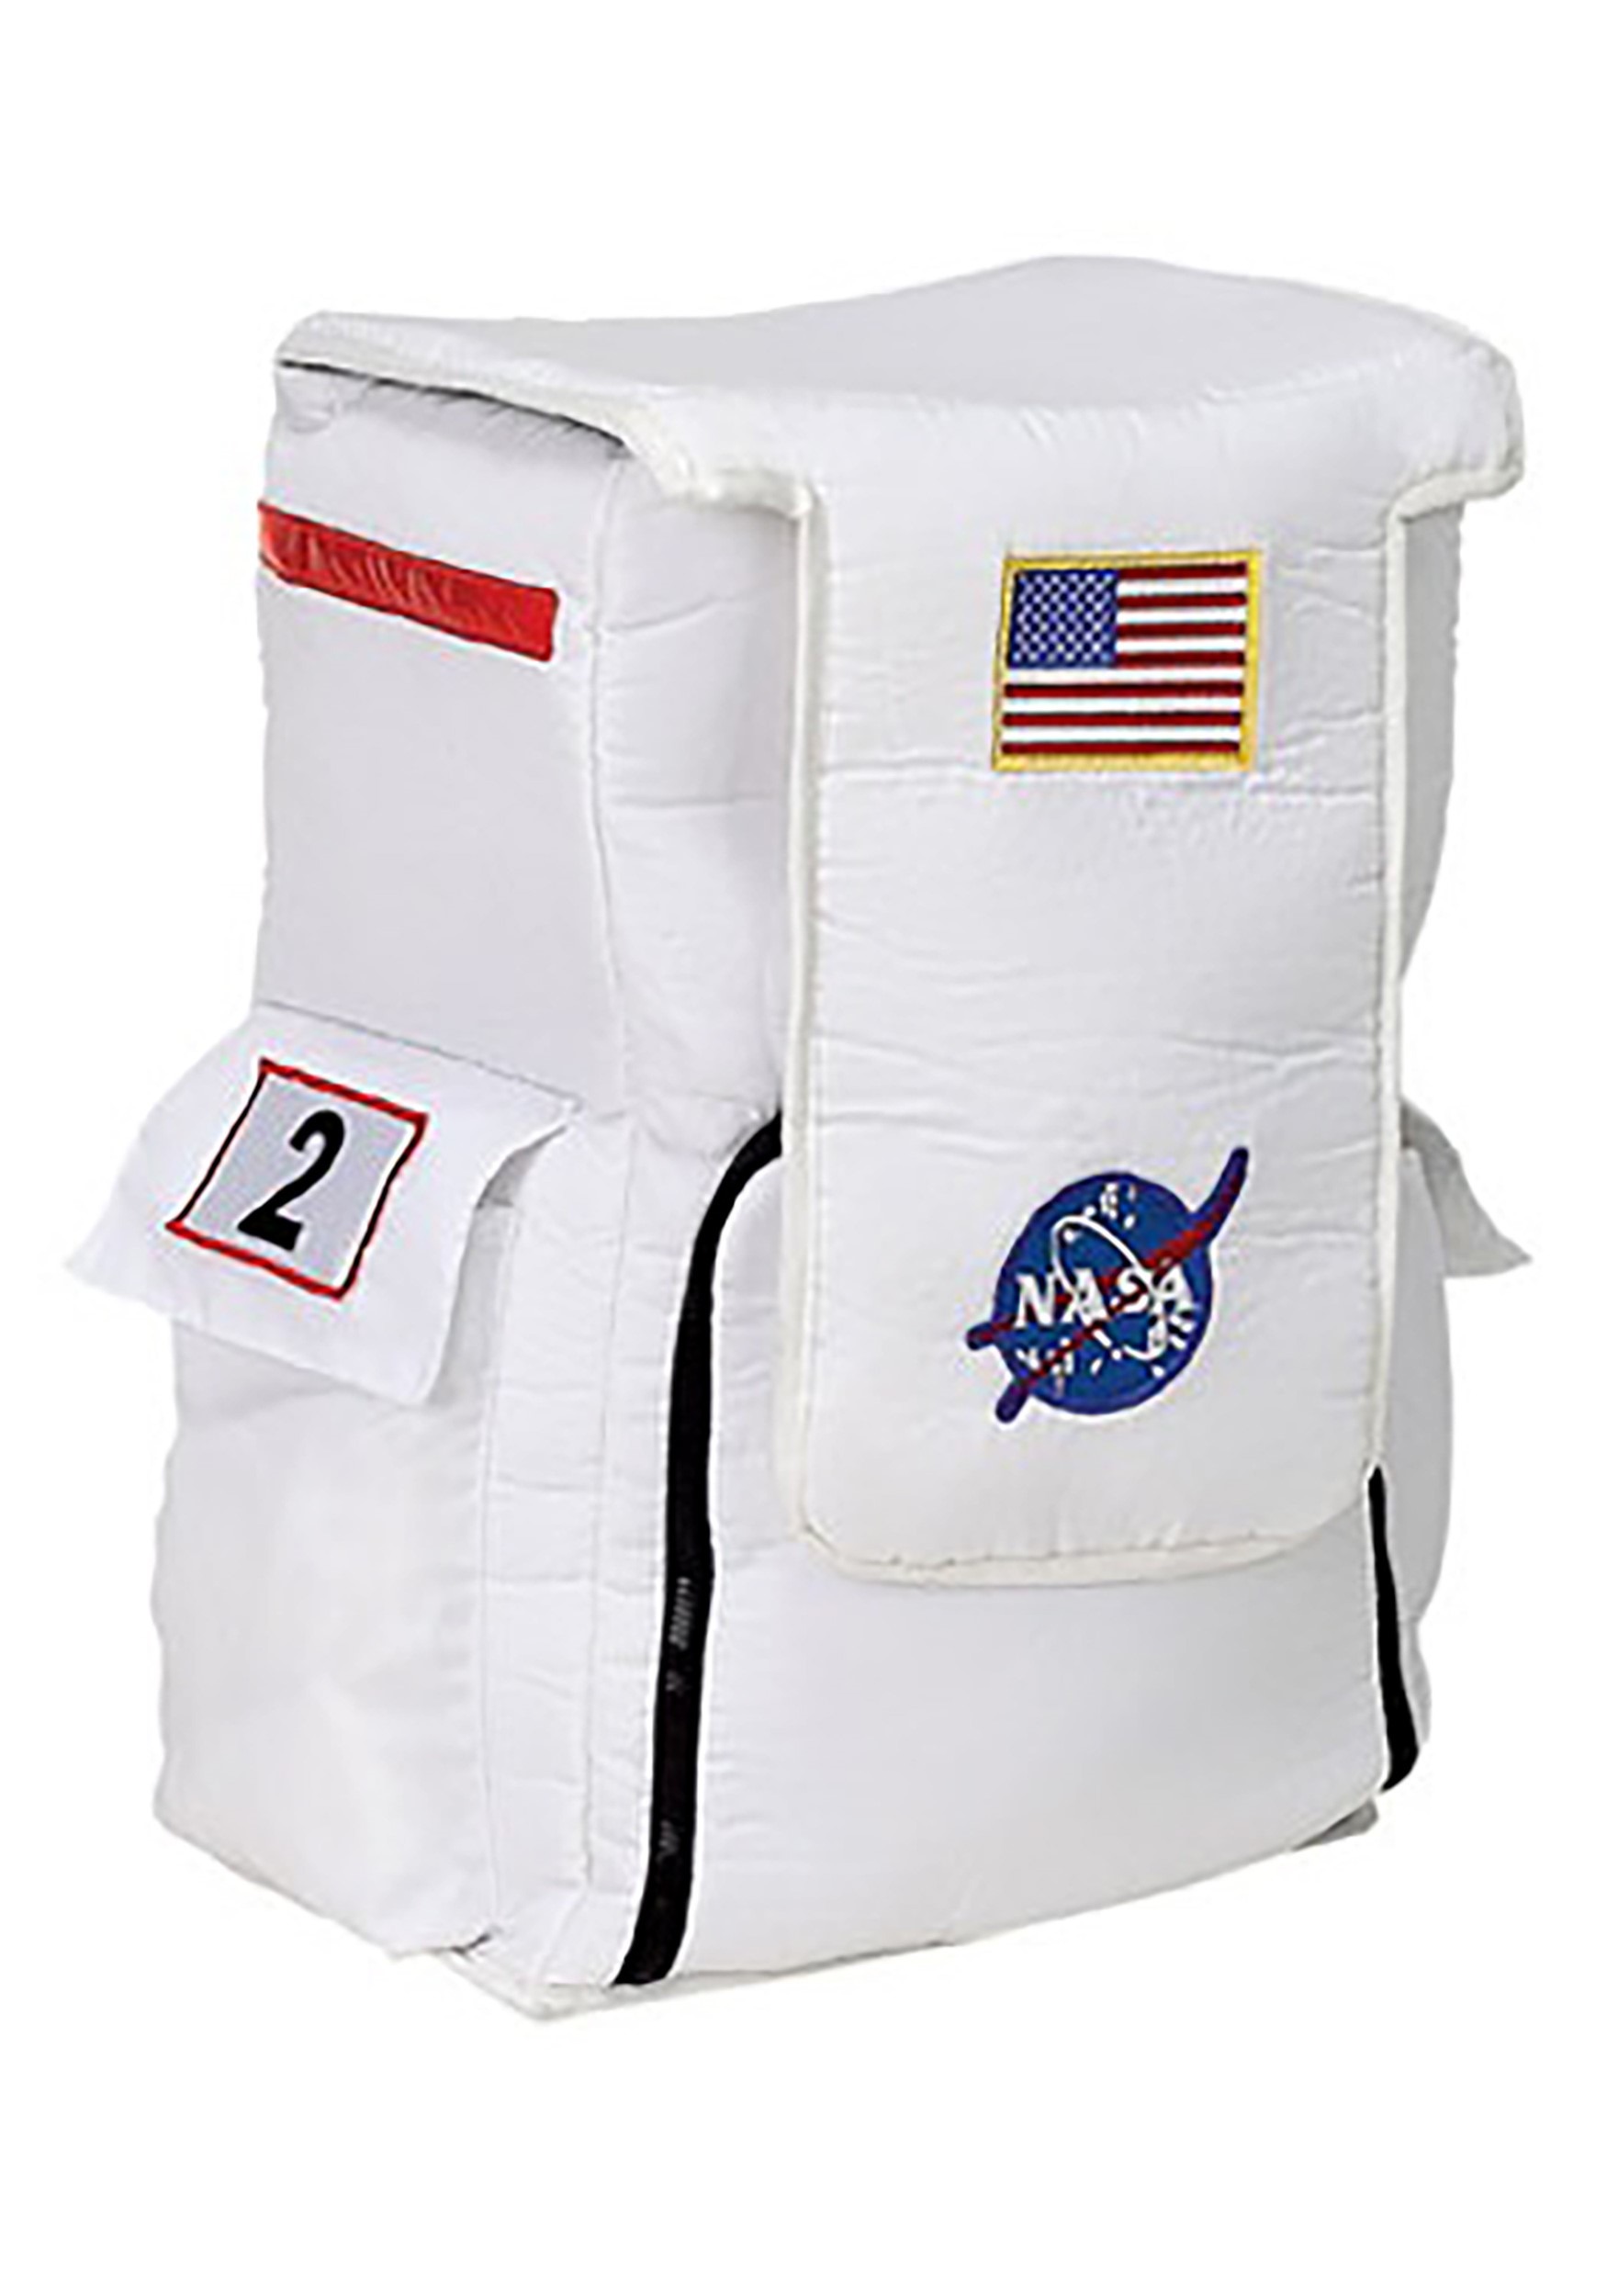 Astronaut Backpack For Child